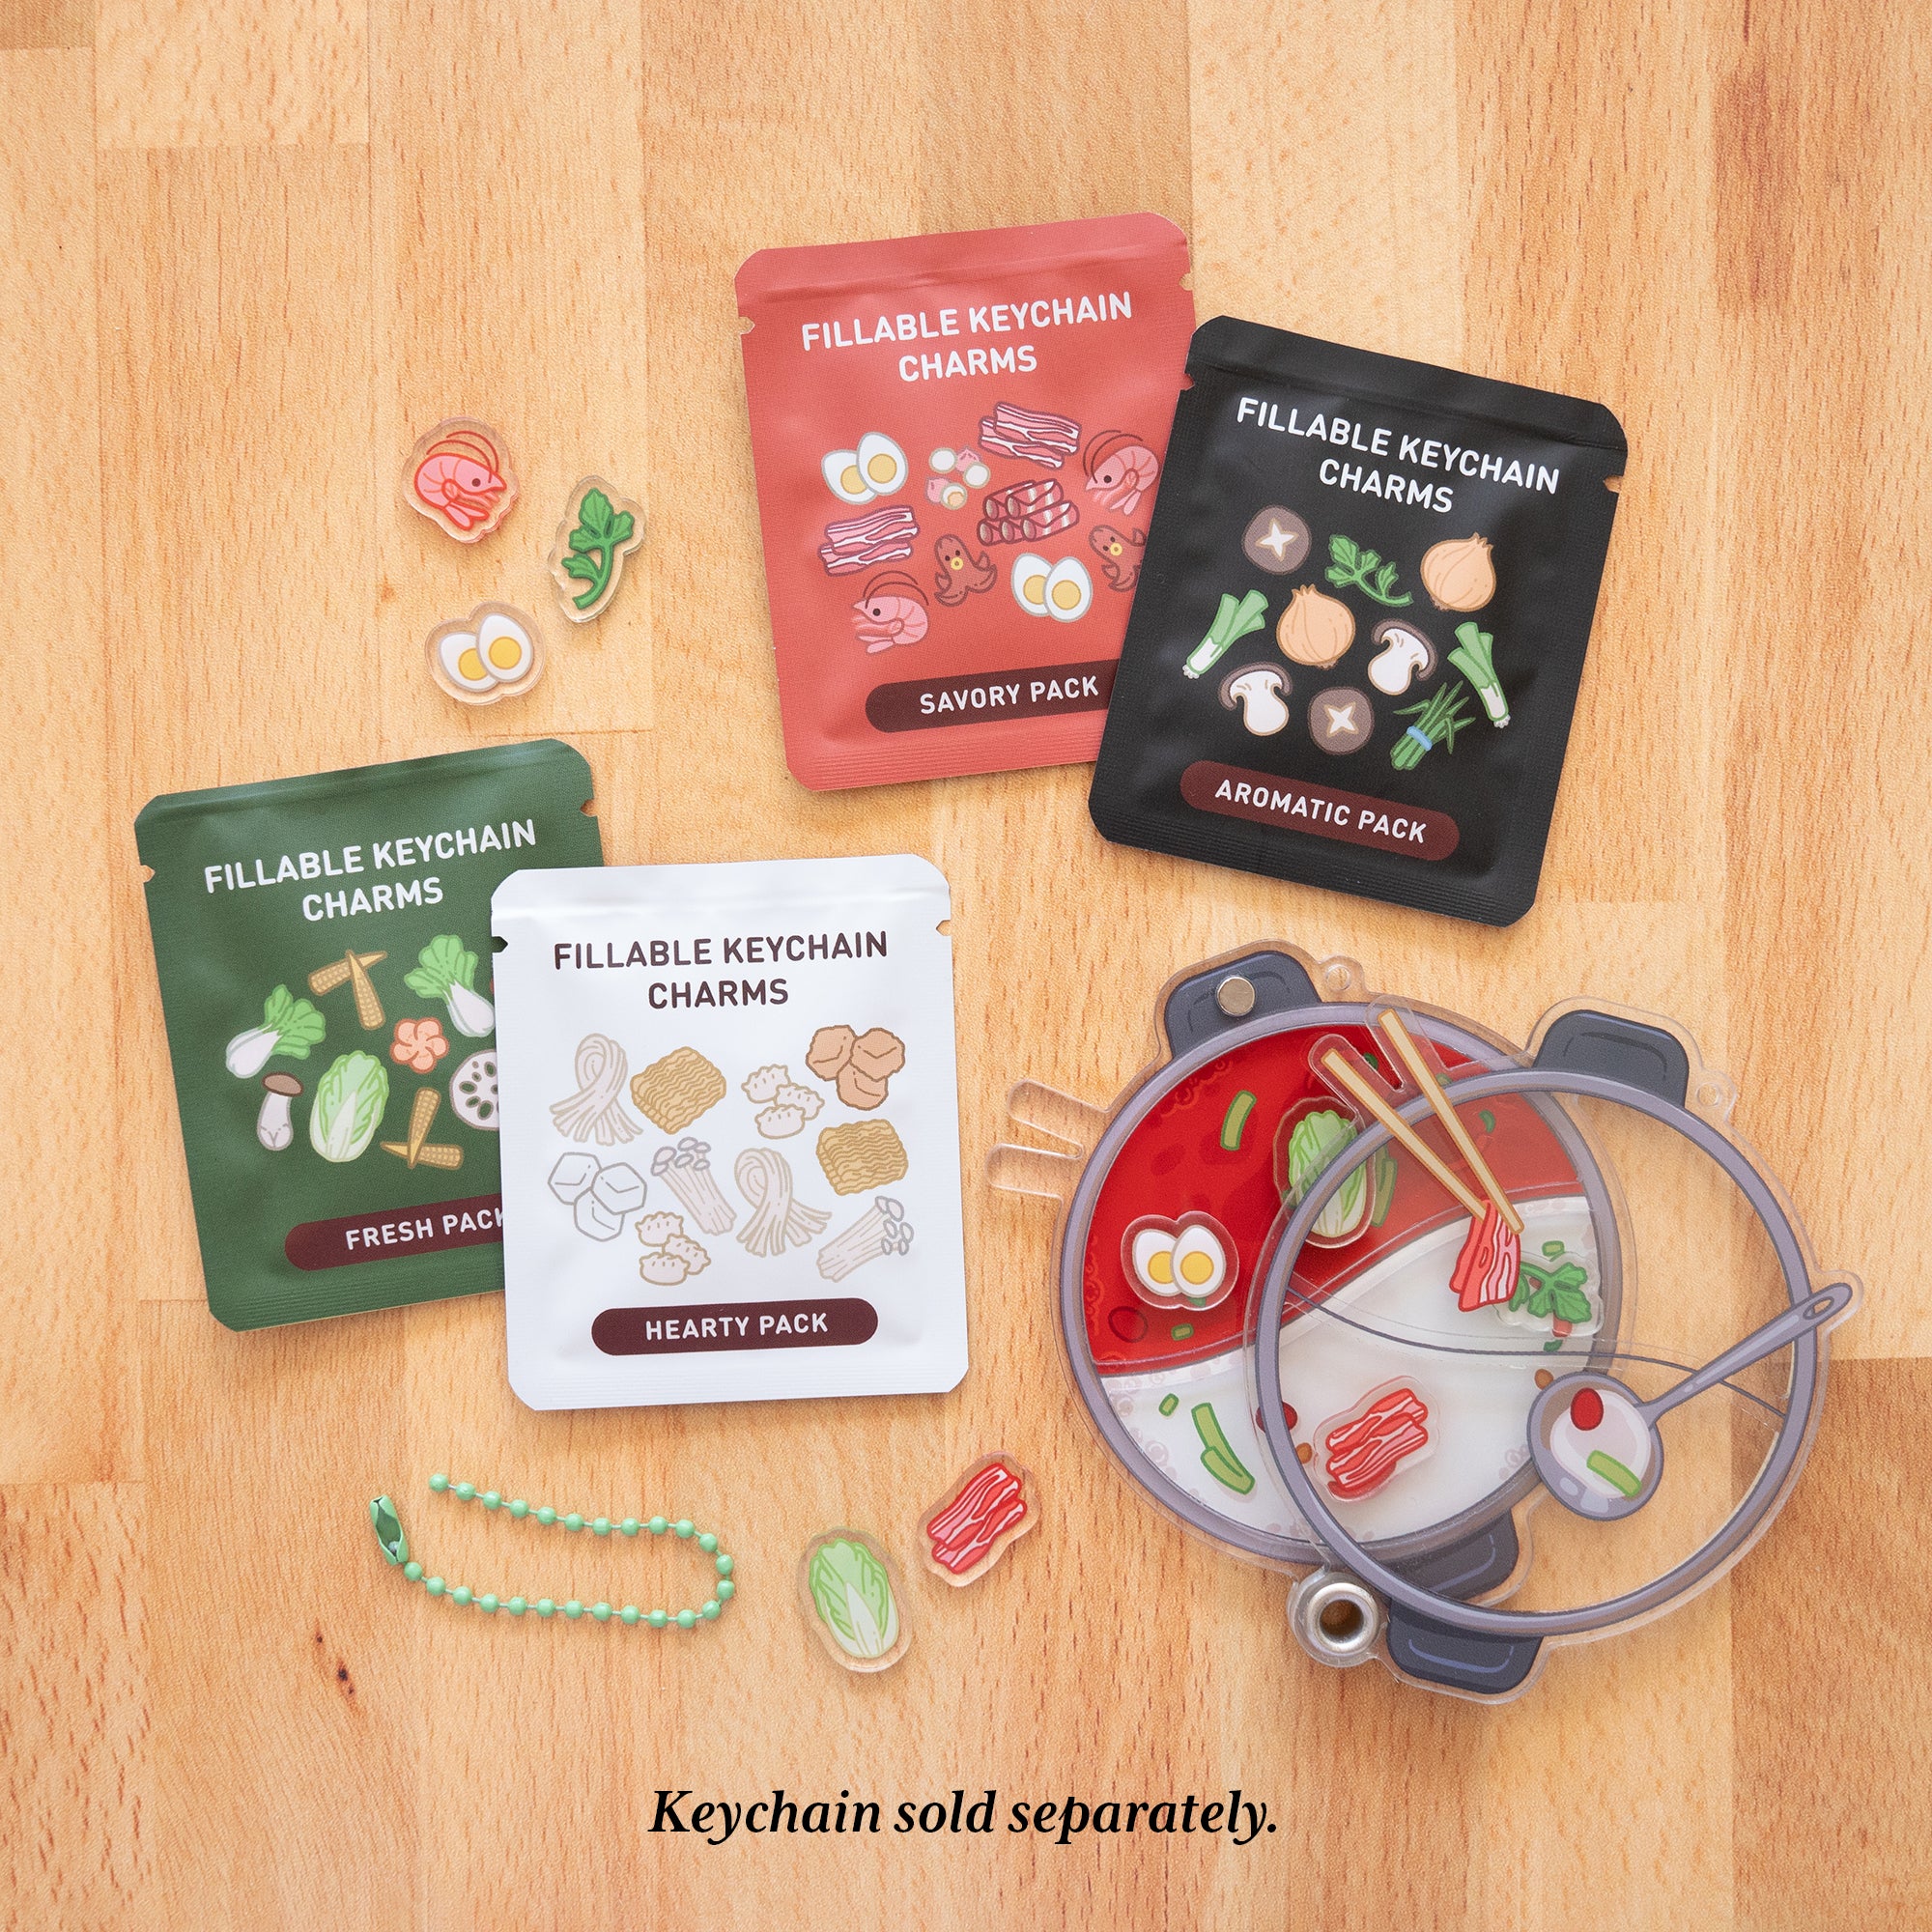 Hot Pot Fillable Keychain Charms Booster Packs